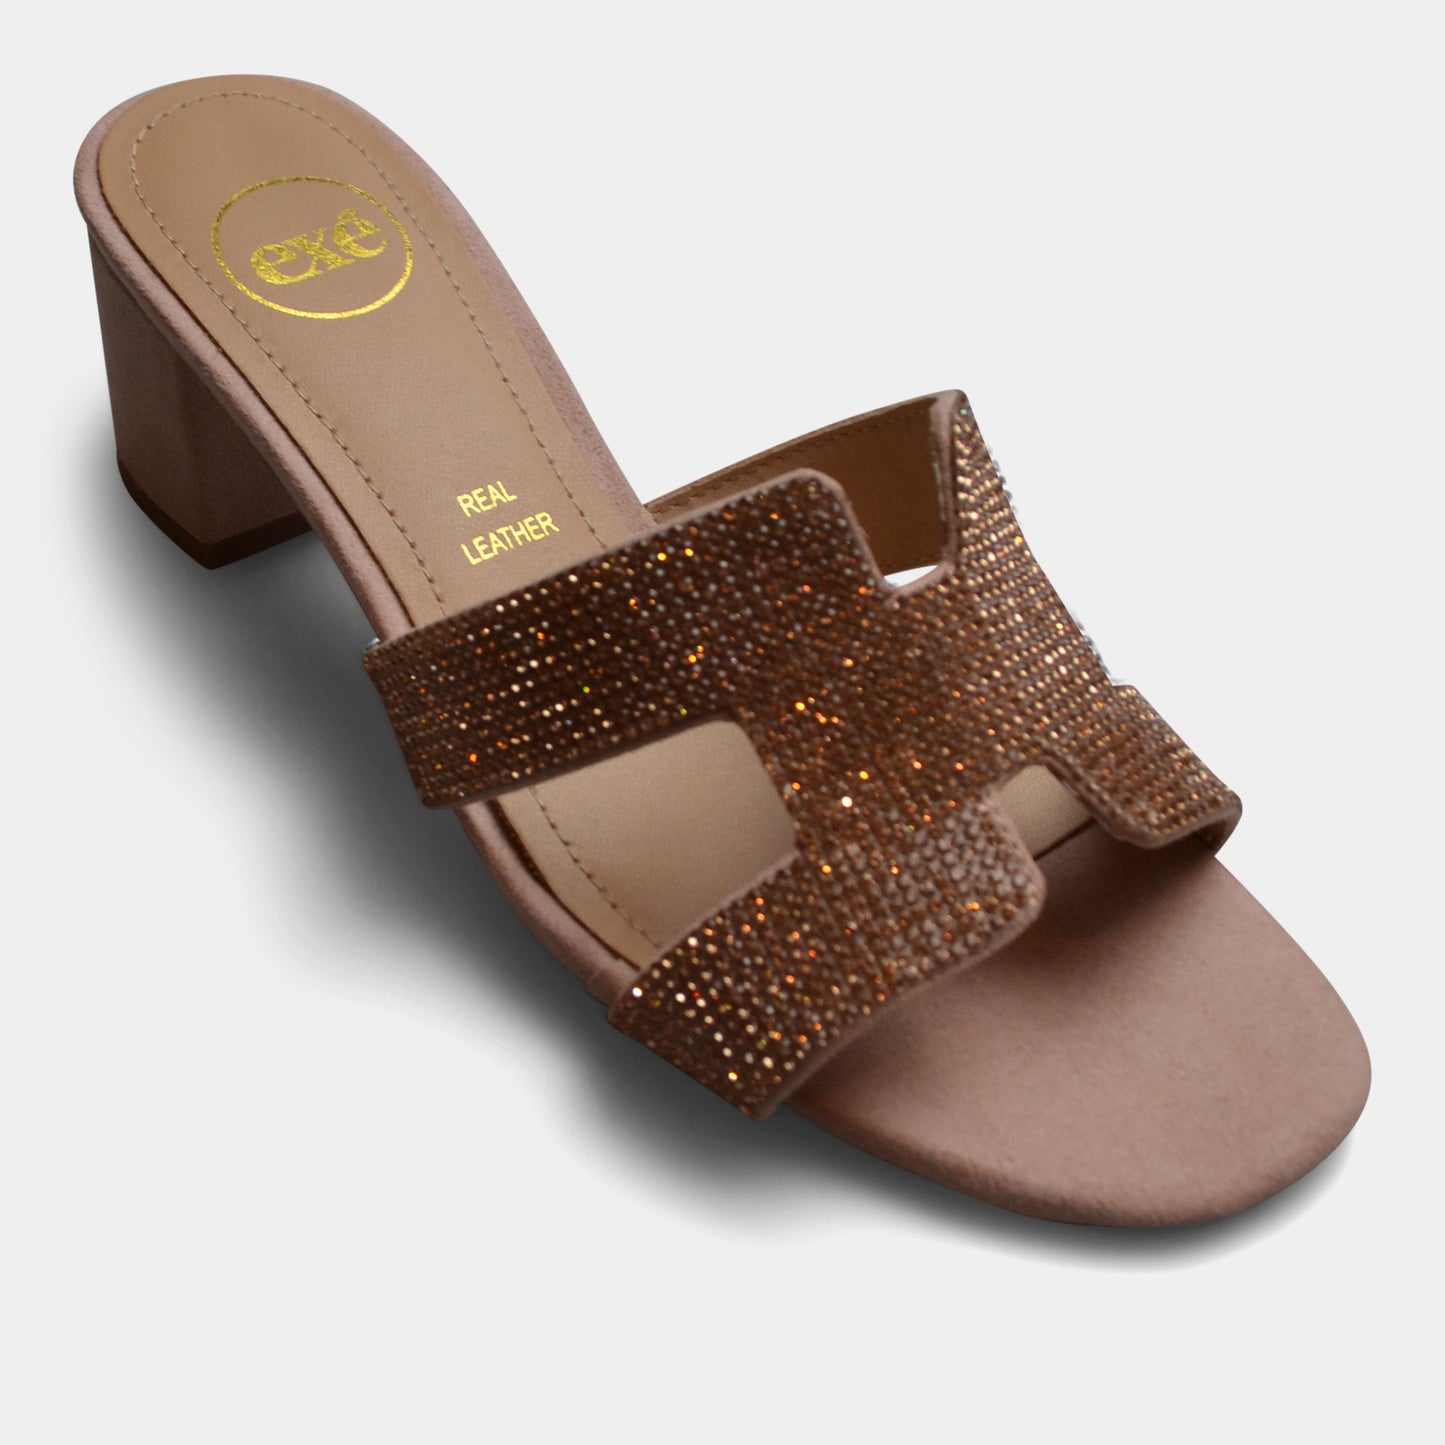 EXE' SANDAL IN NUDE